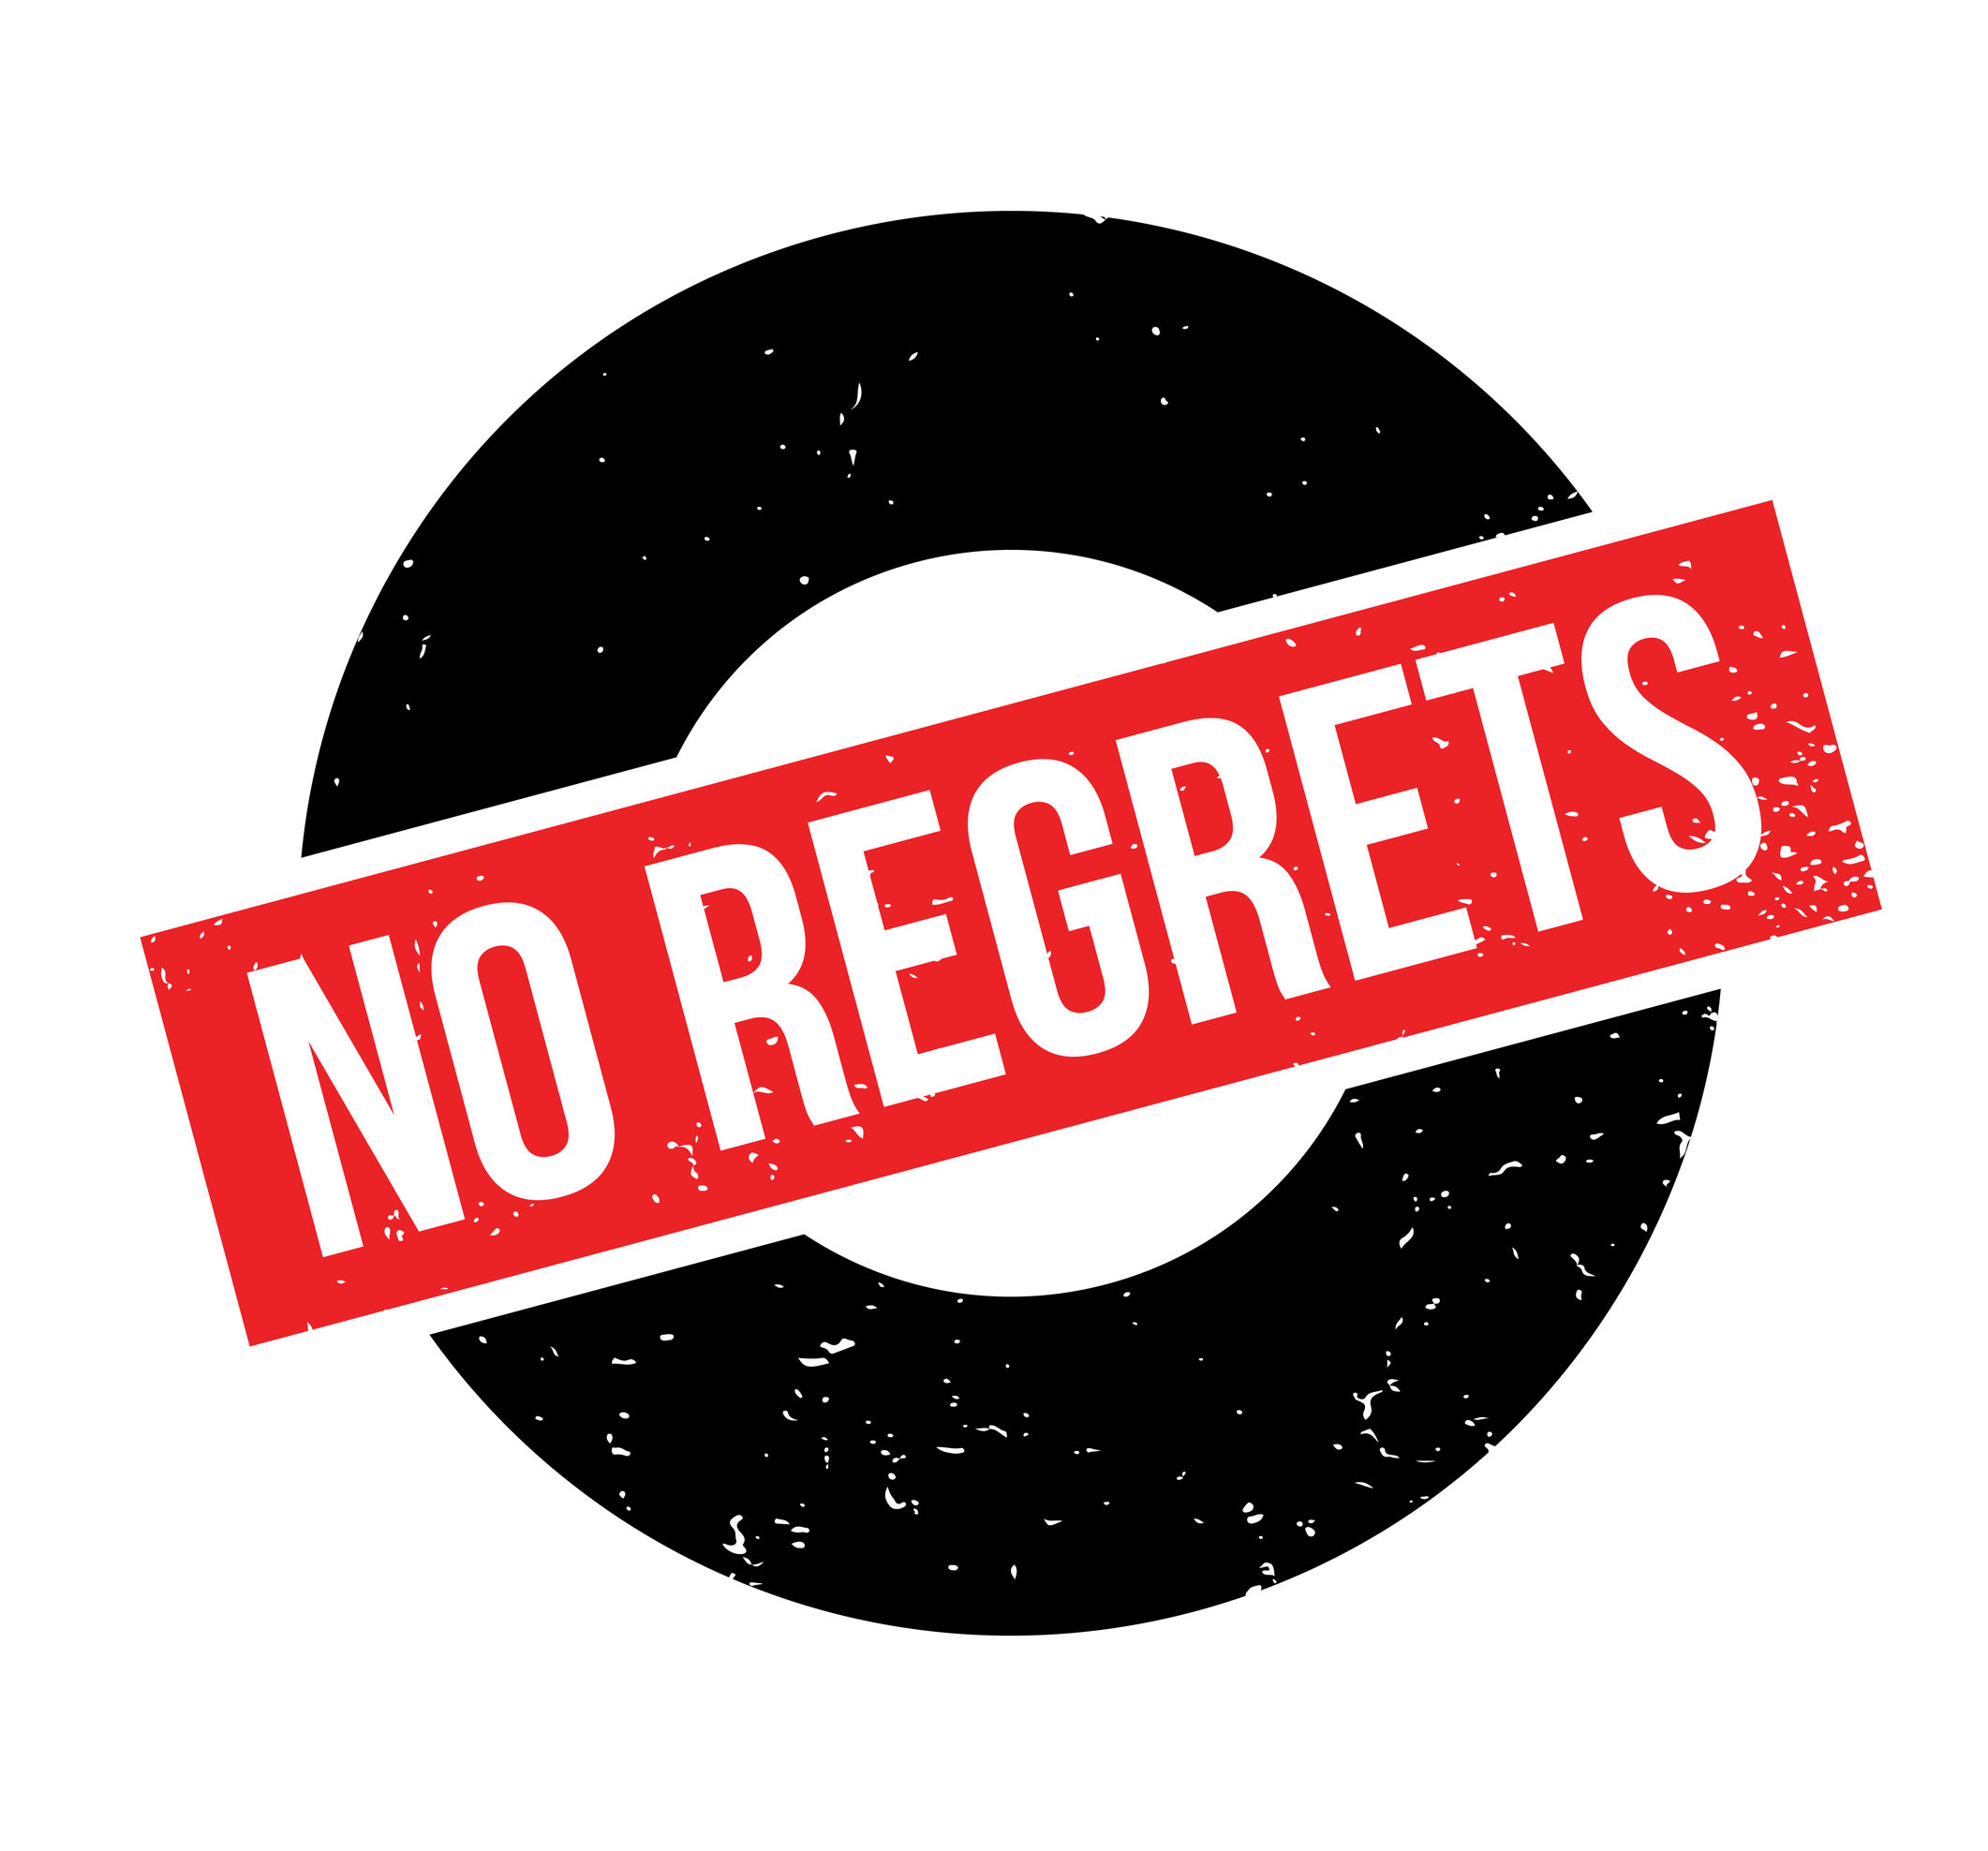 How to Live with No Regrets